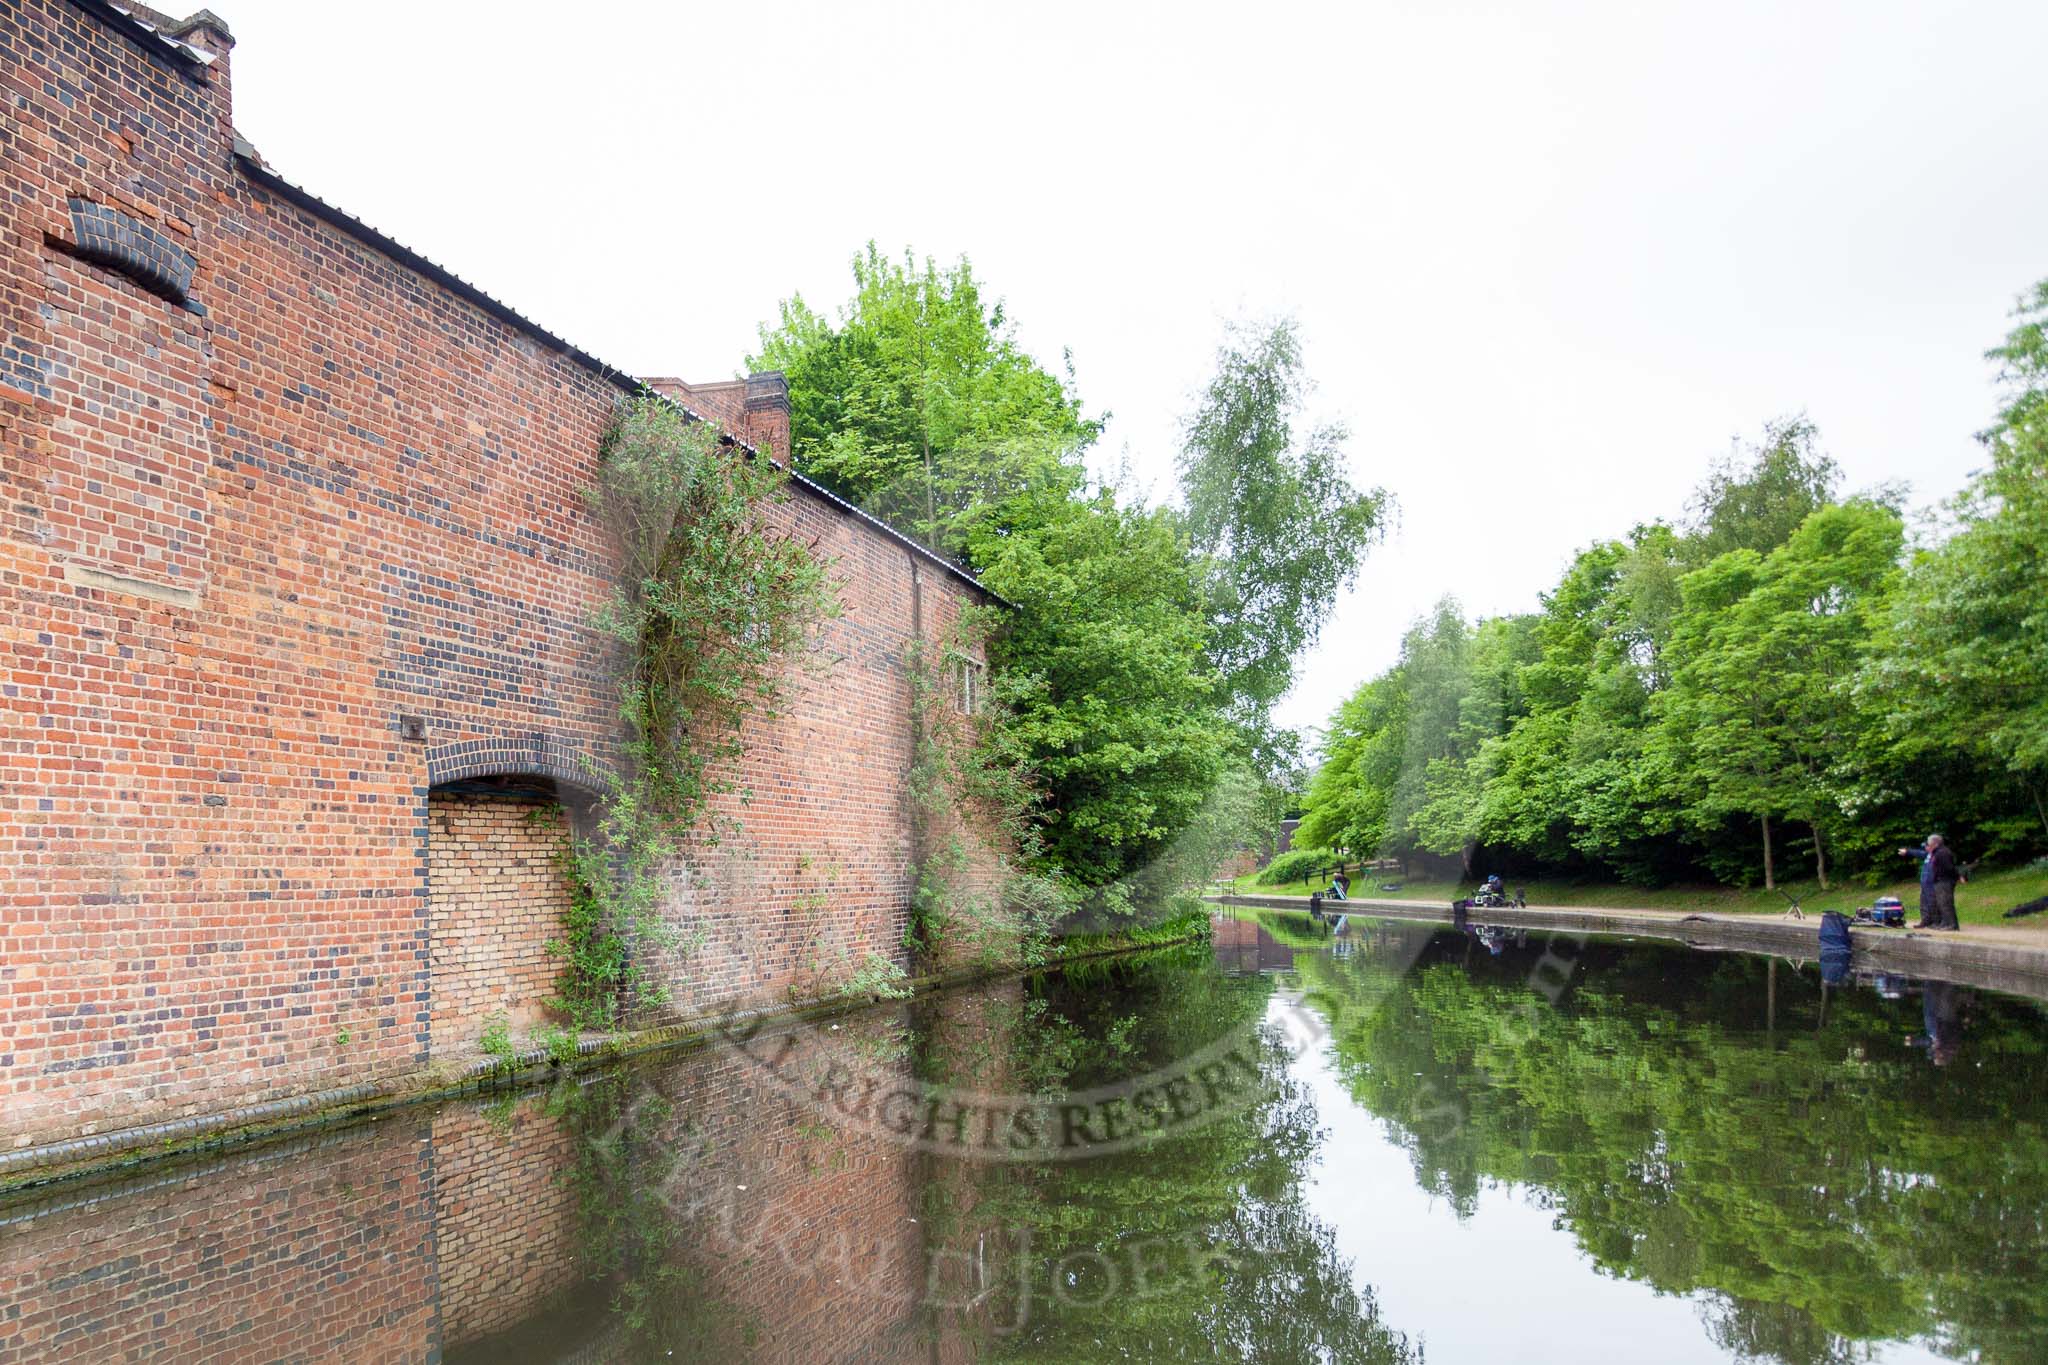 BCN 24h Marathon Challenge 2015: Was it an opening to load or unload boats, or the entrance to a basin inside the building? Soho Loop, BCN.
Birmingham Canal Navigations,



on 23 May 2015 at 09:06, image #32